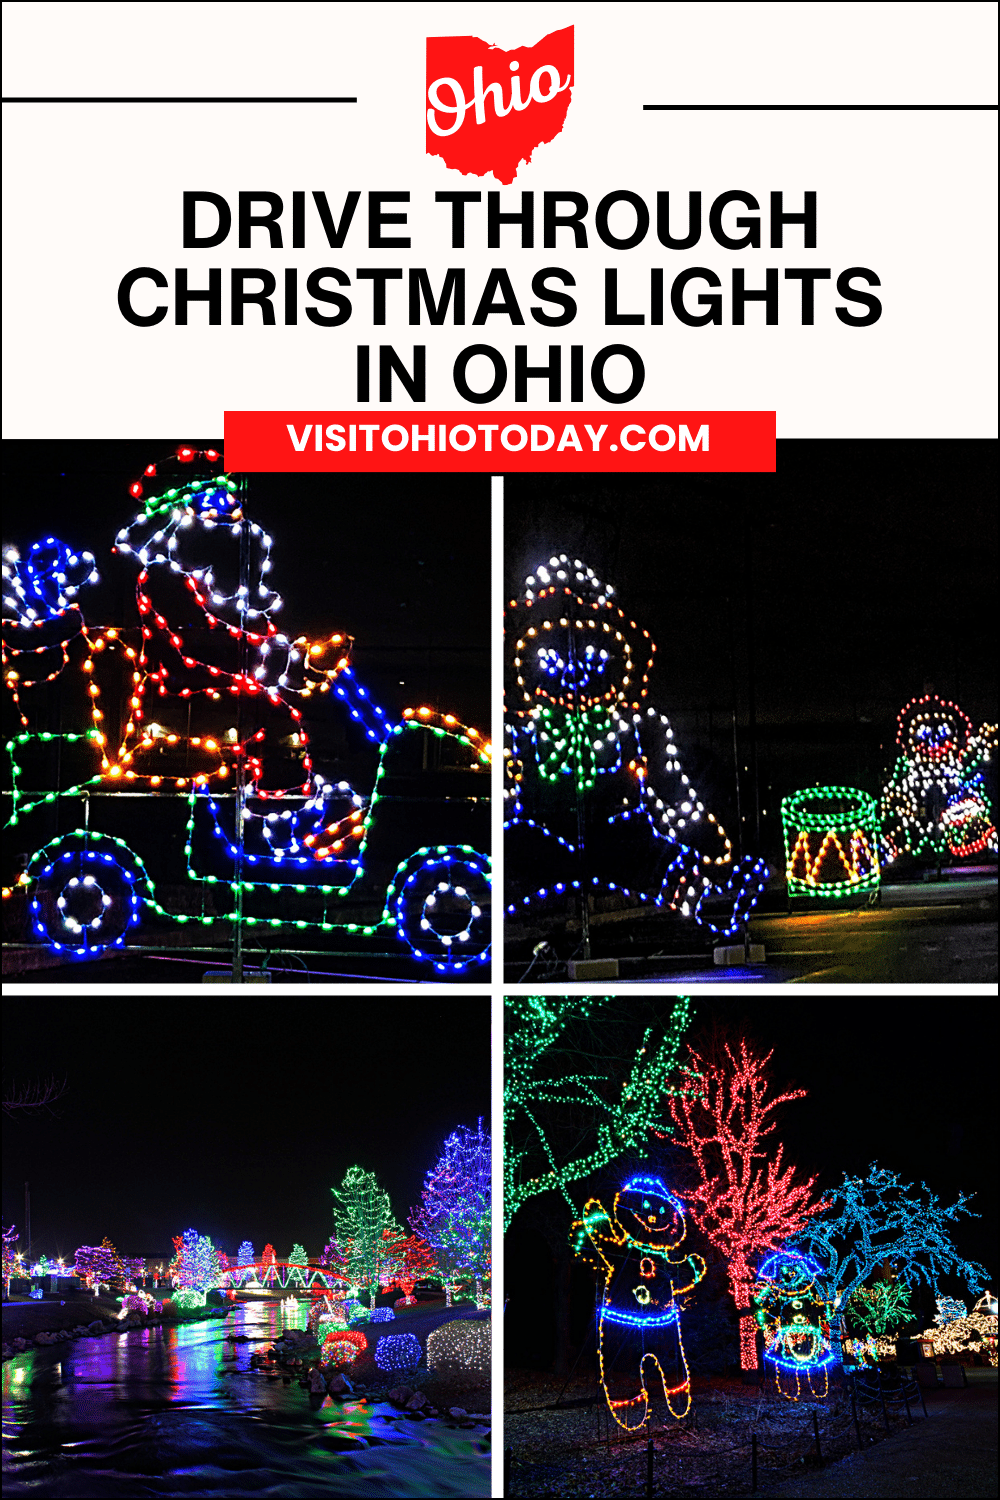 Christmas is the most magical time of the year. What better way is there to celebrate Christmas than driving through magical Christmas light displays? Here we feature drive through Christmas lights in all regions of the state of Ohio.